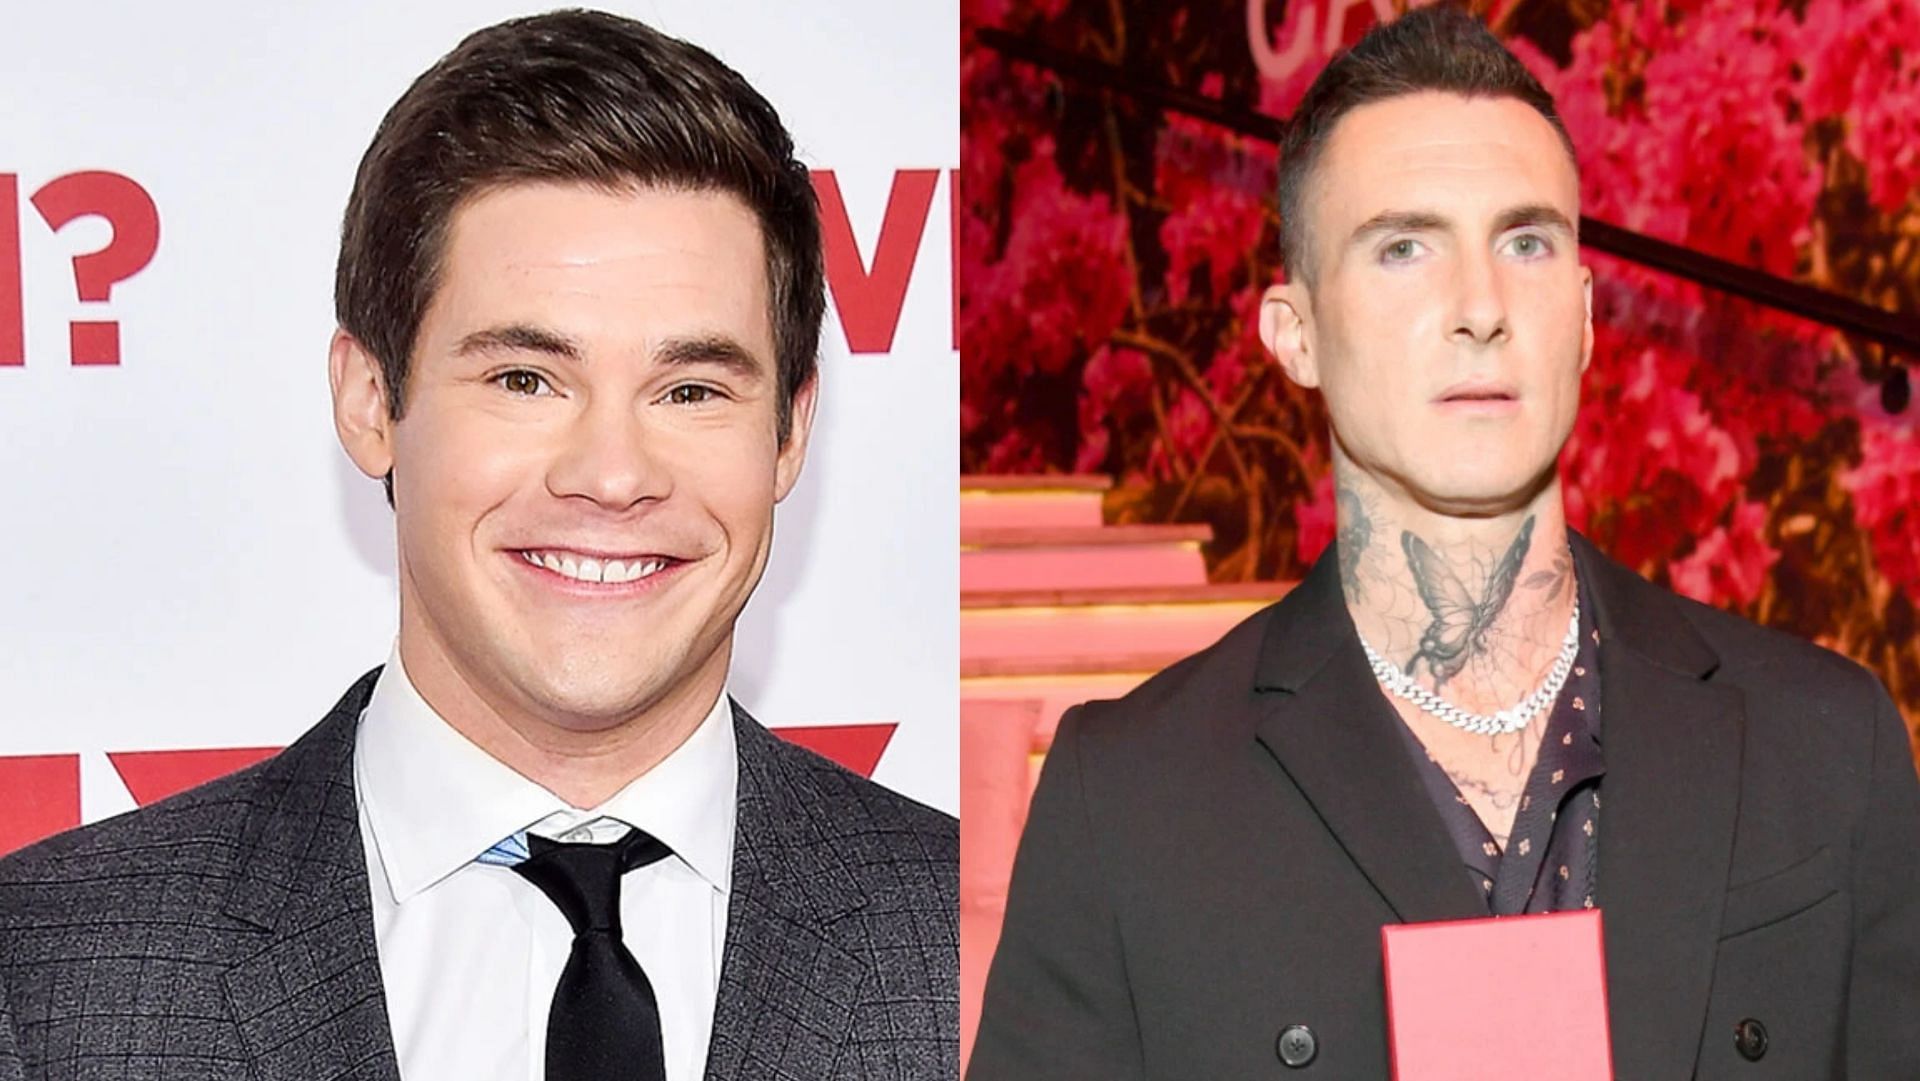 Adam Devine is often confused with Adam Levine because of their similar names. (Image via Mike Windle/Getty, Jon Kopaloff/Getty Images)